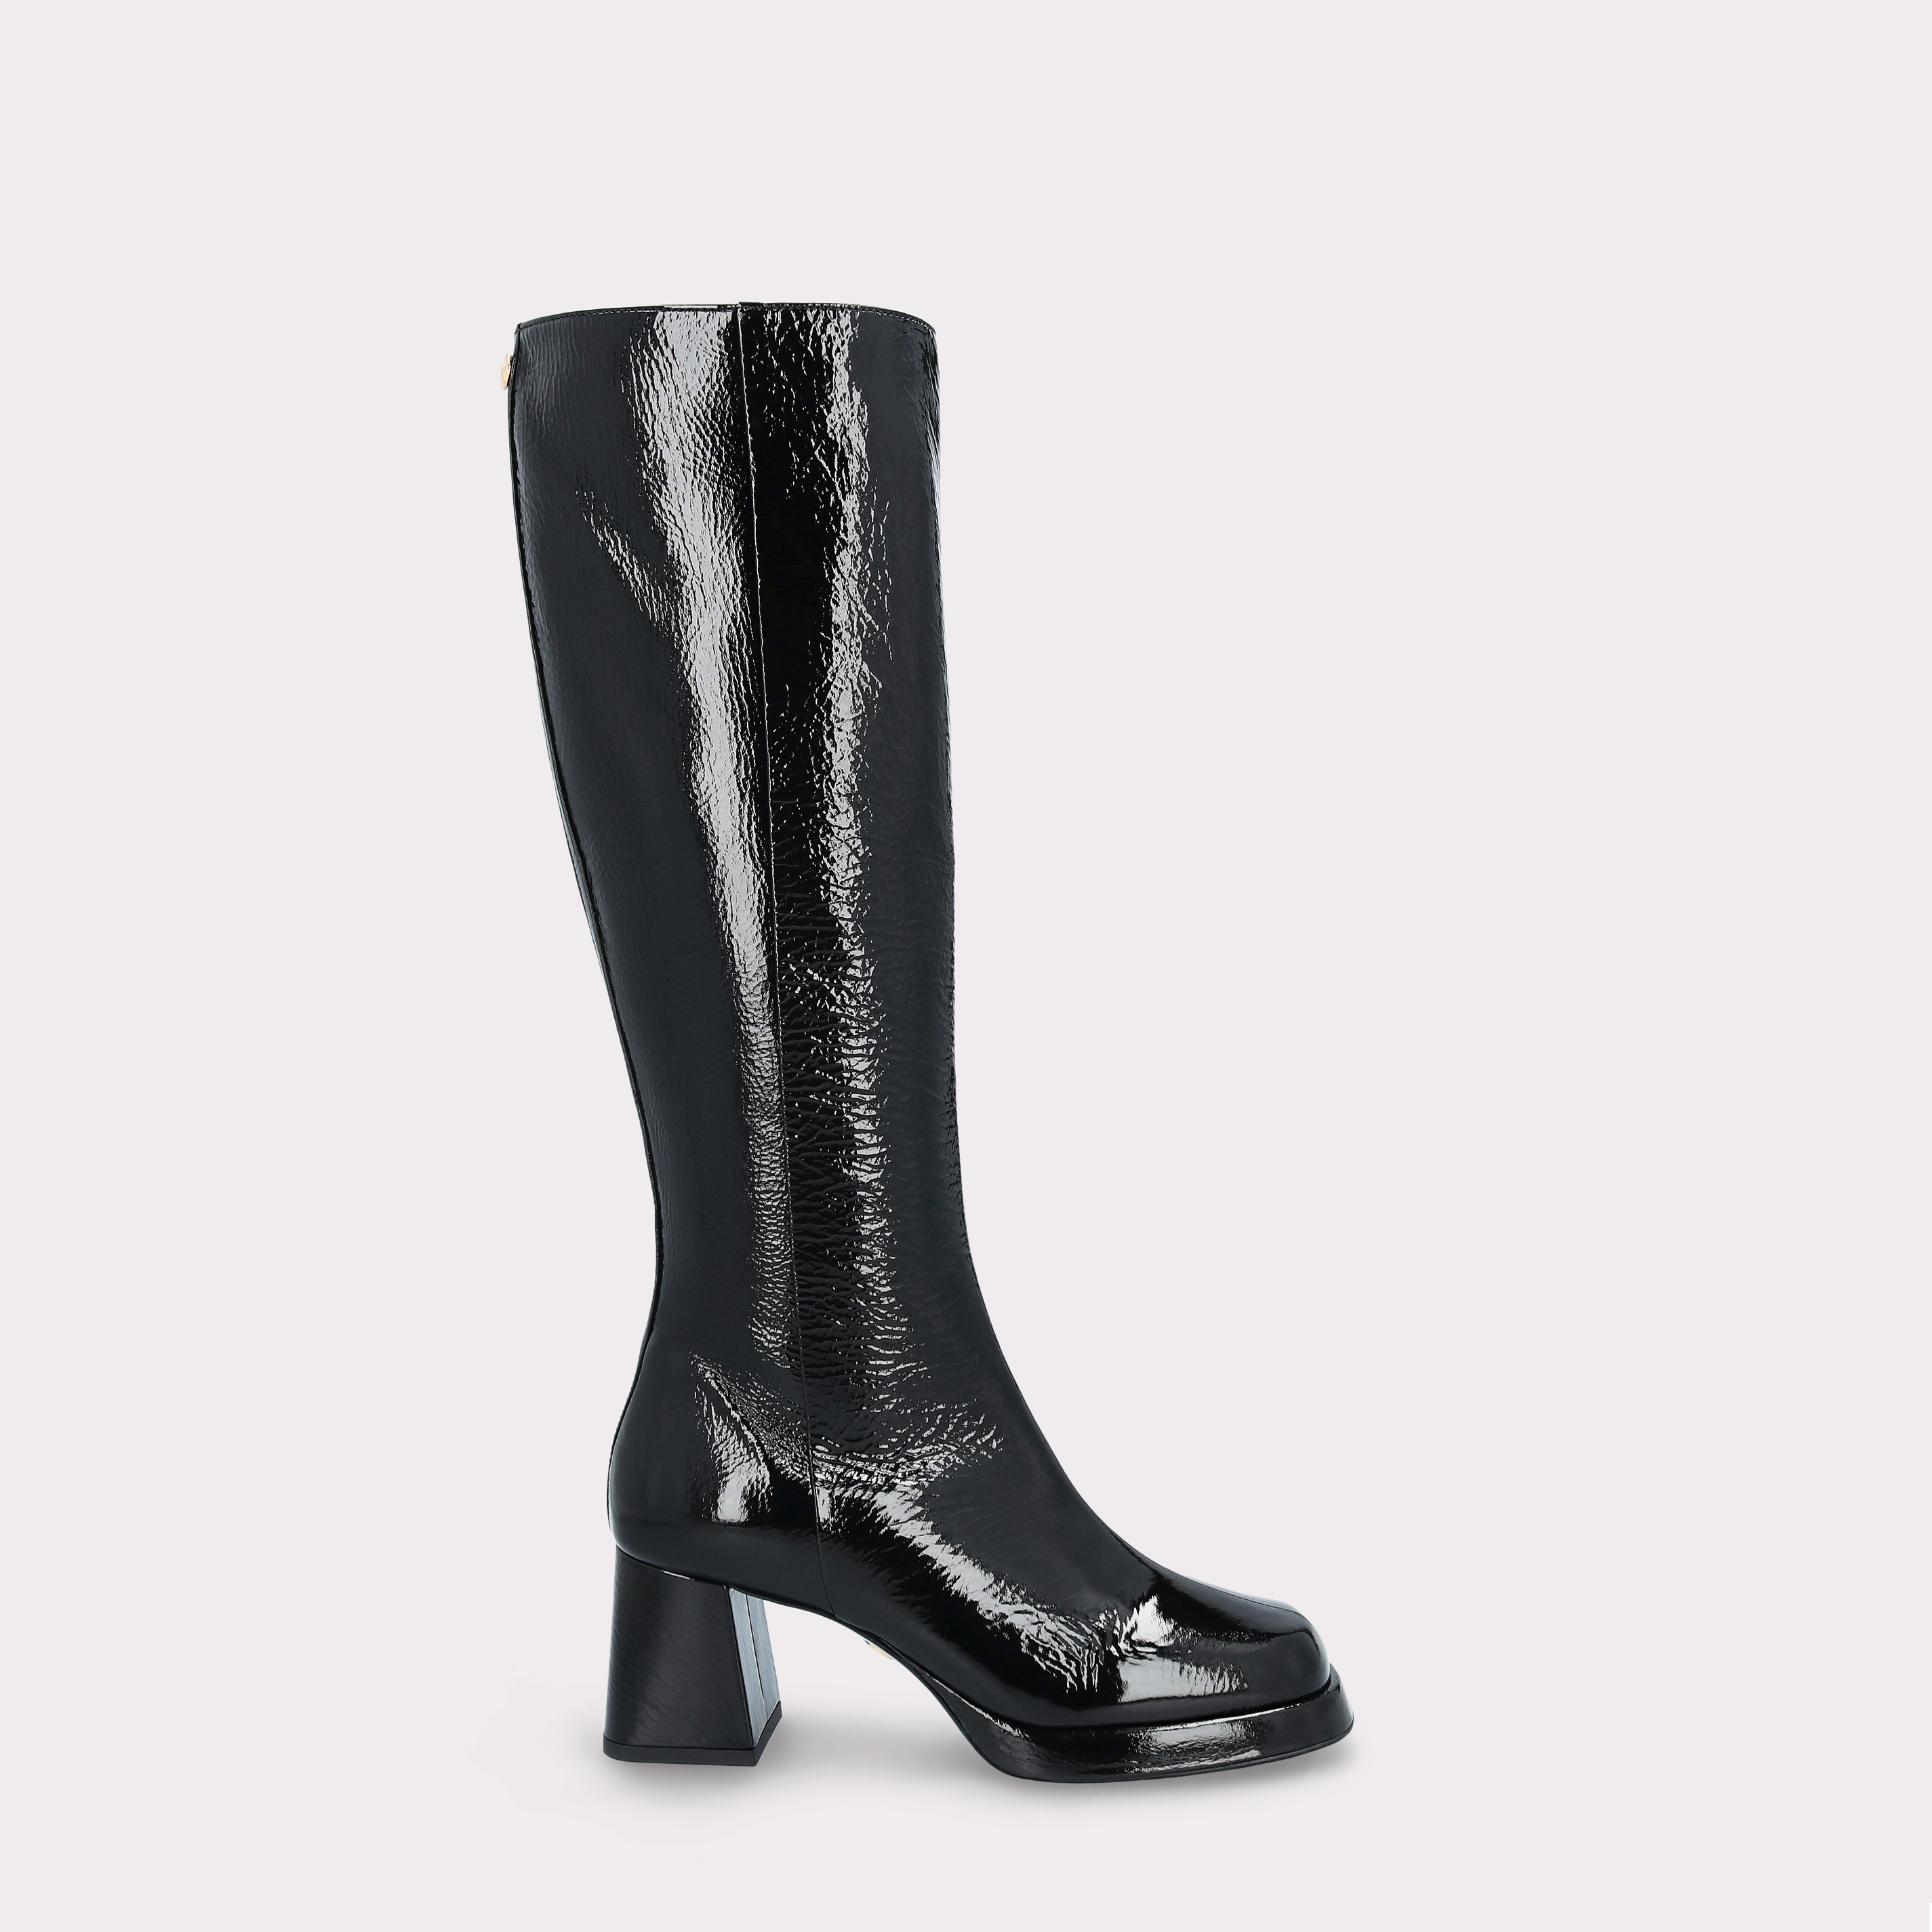 CONNIE B BLACK CRUSHED PATENT LEATHER PLATFORM BOOTS